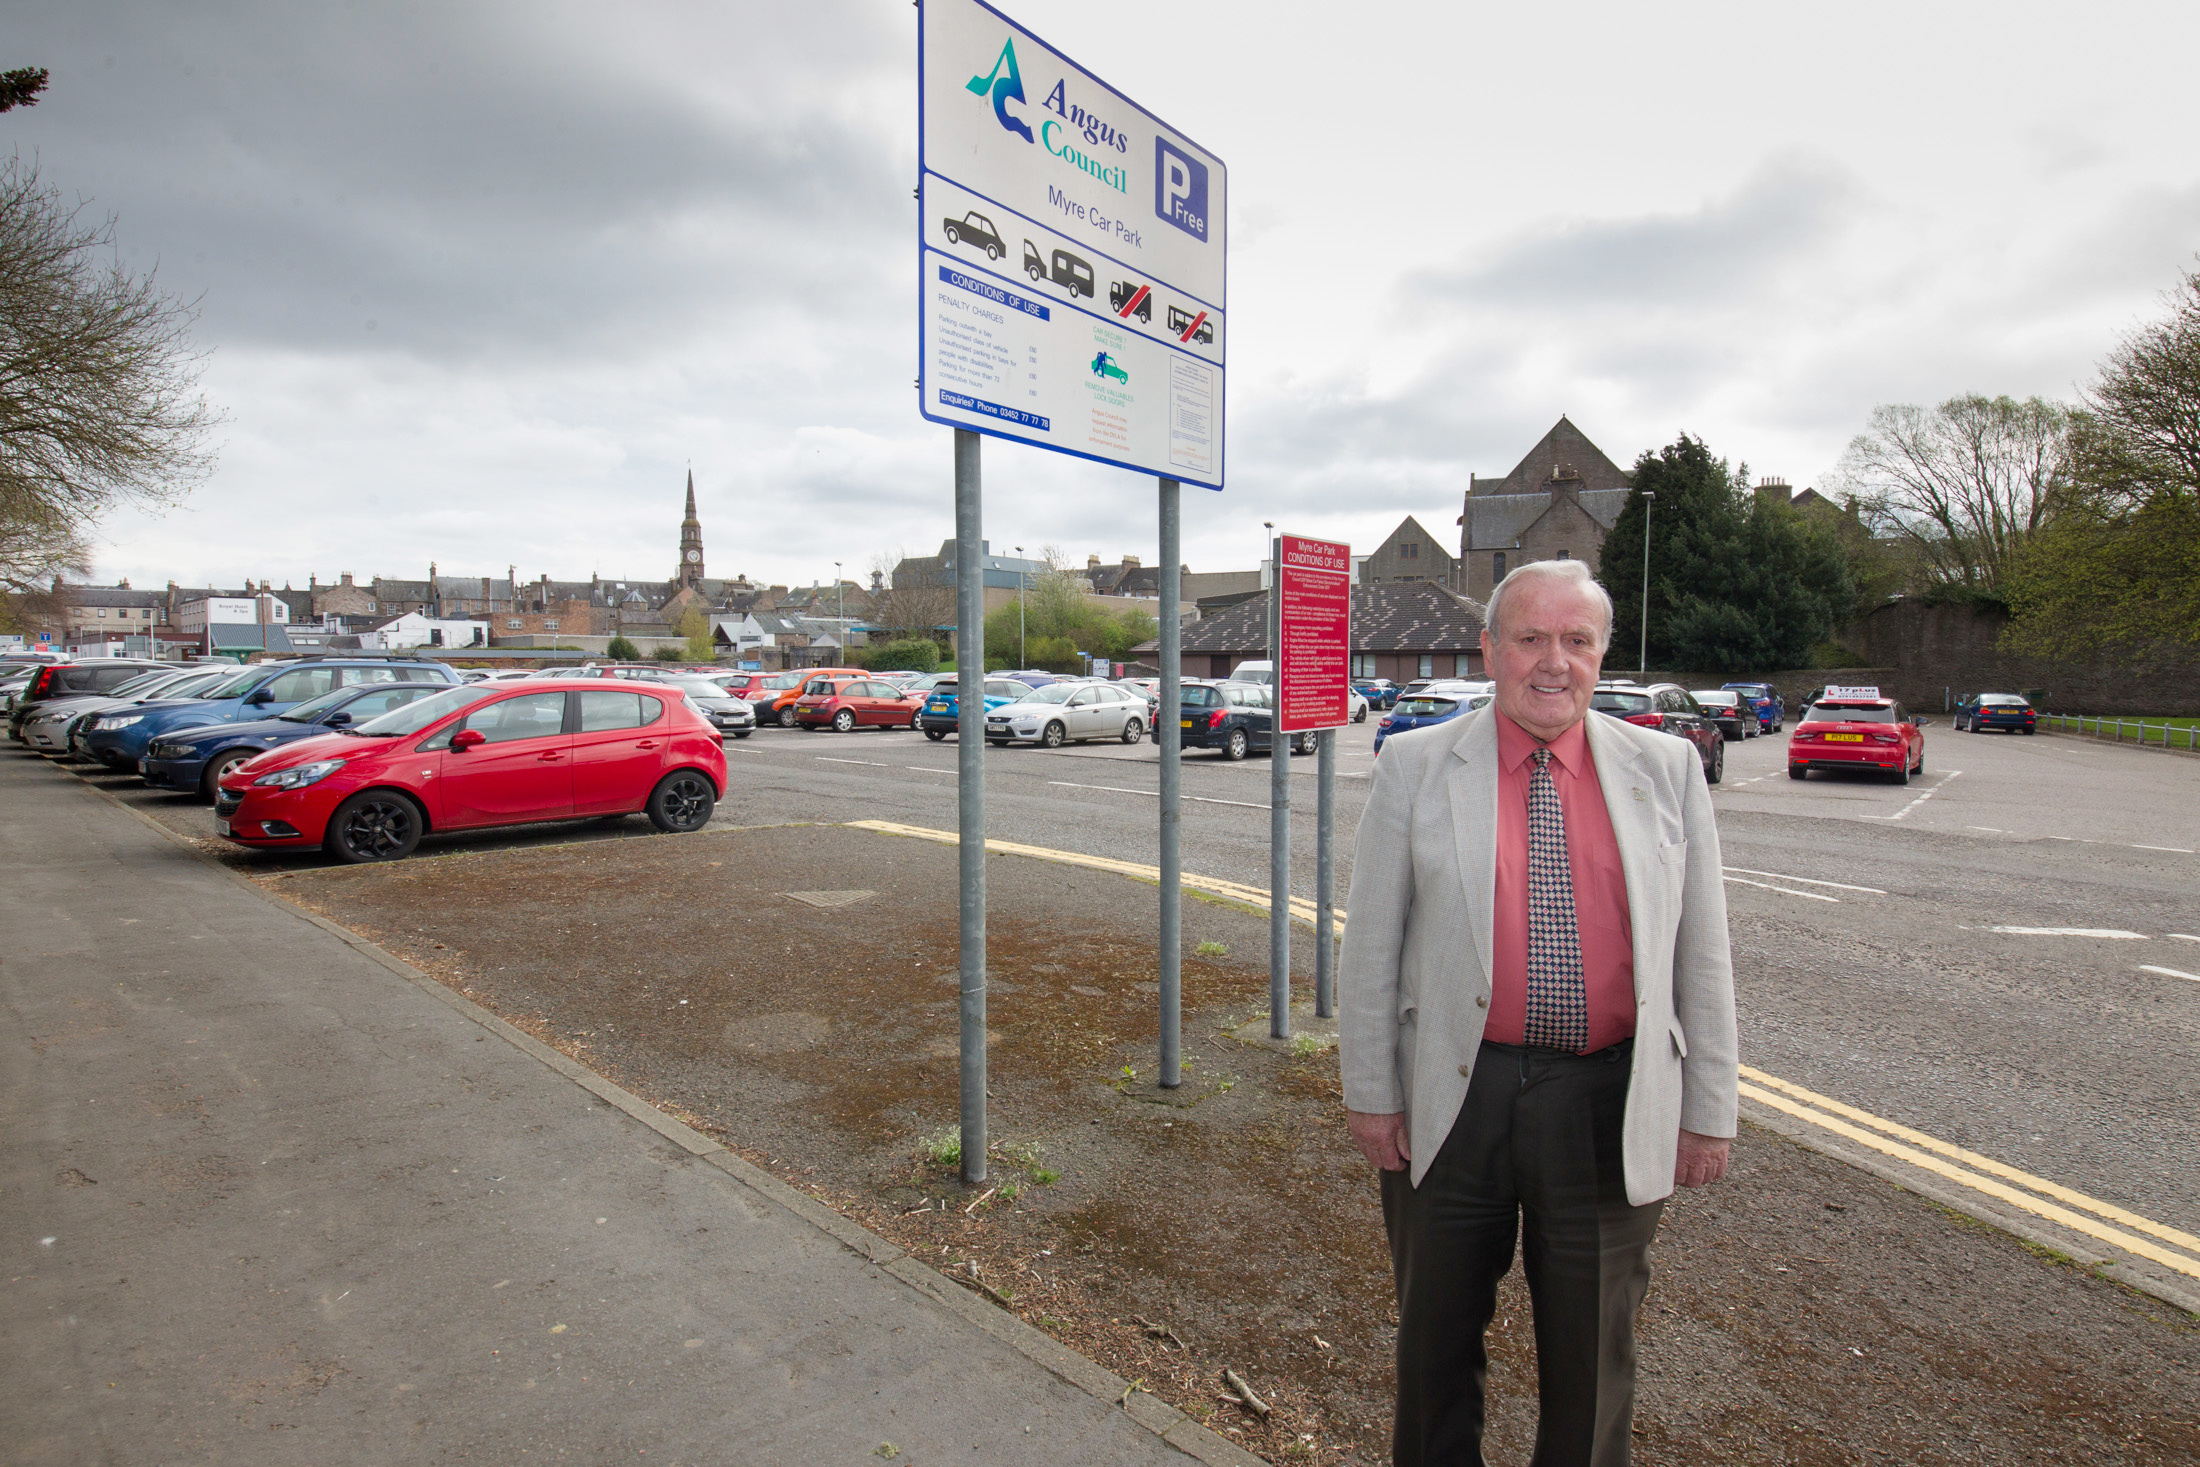 Angus depute Provost Colin Brown says council staff and teachers should pay for parking